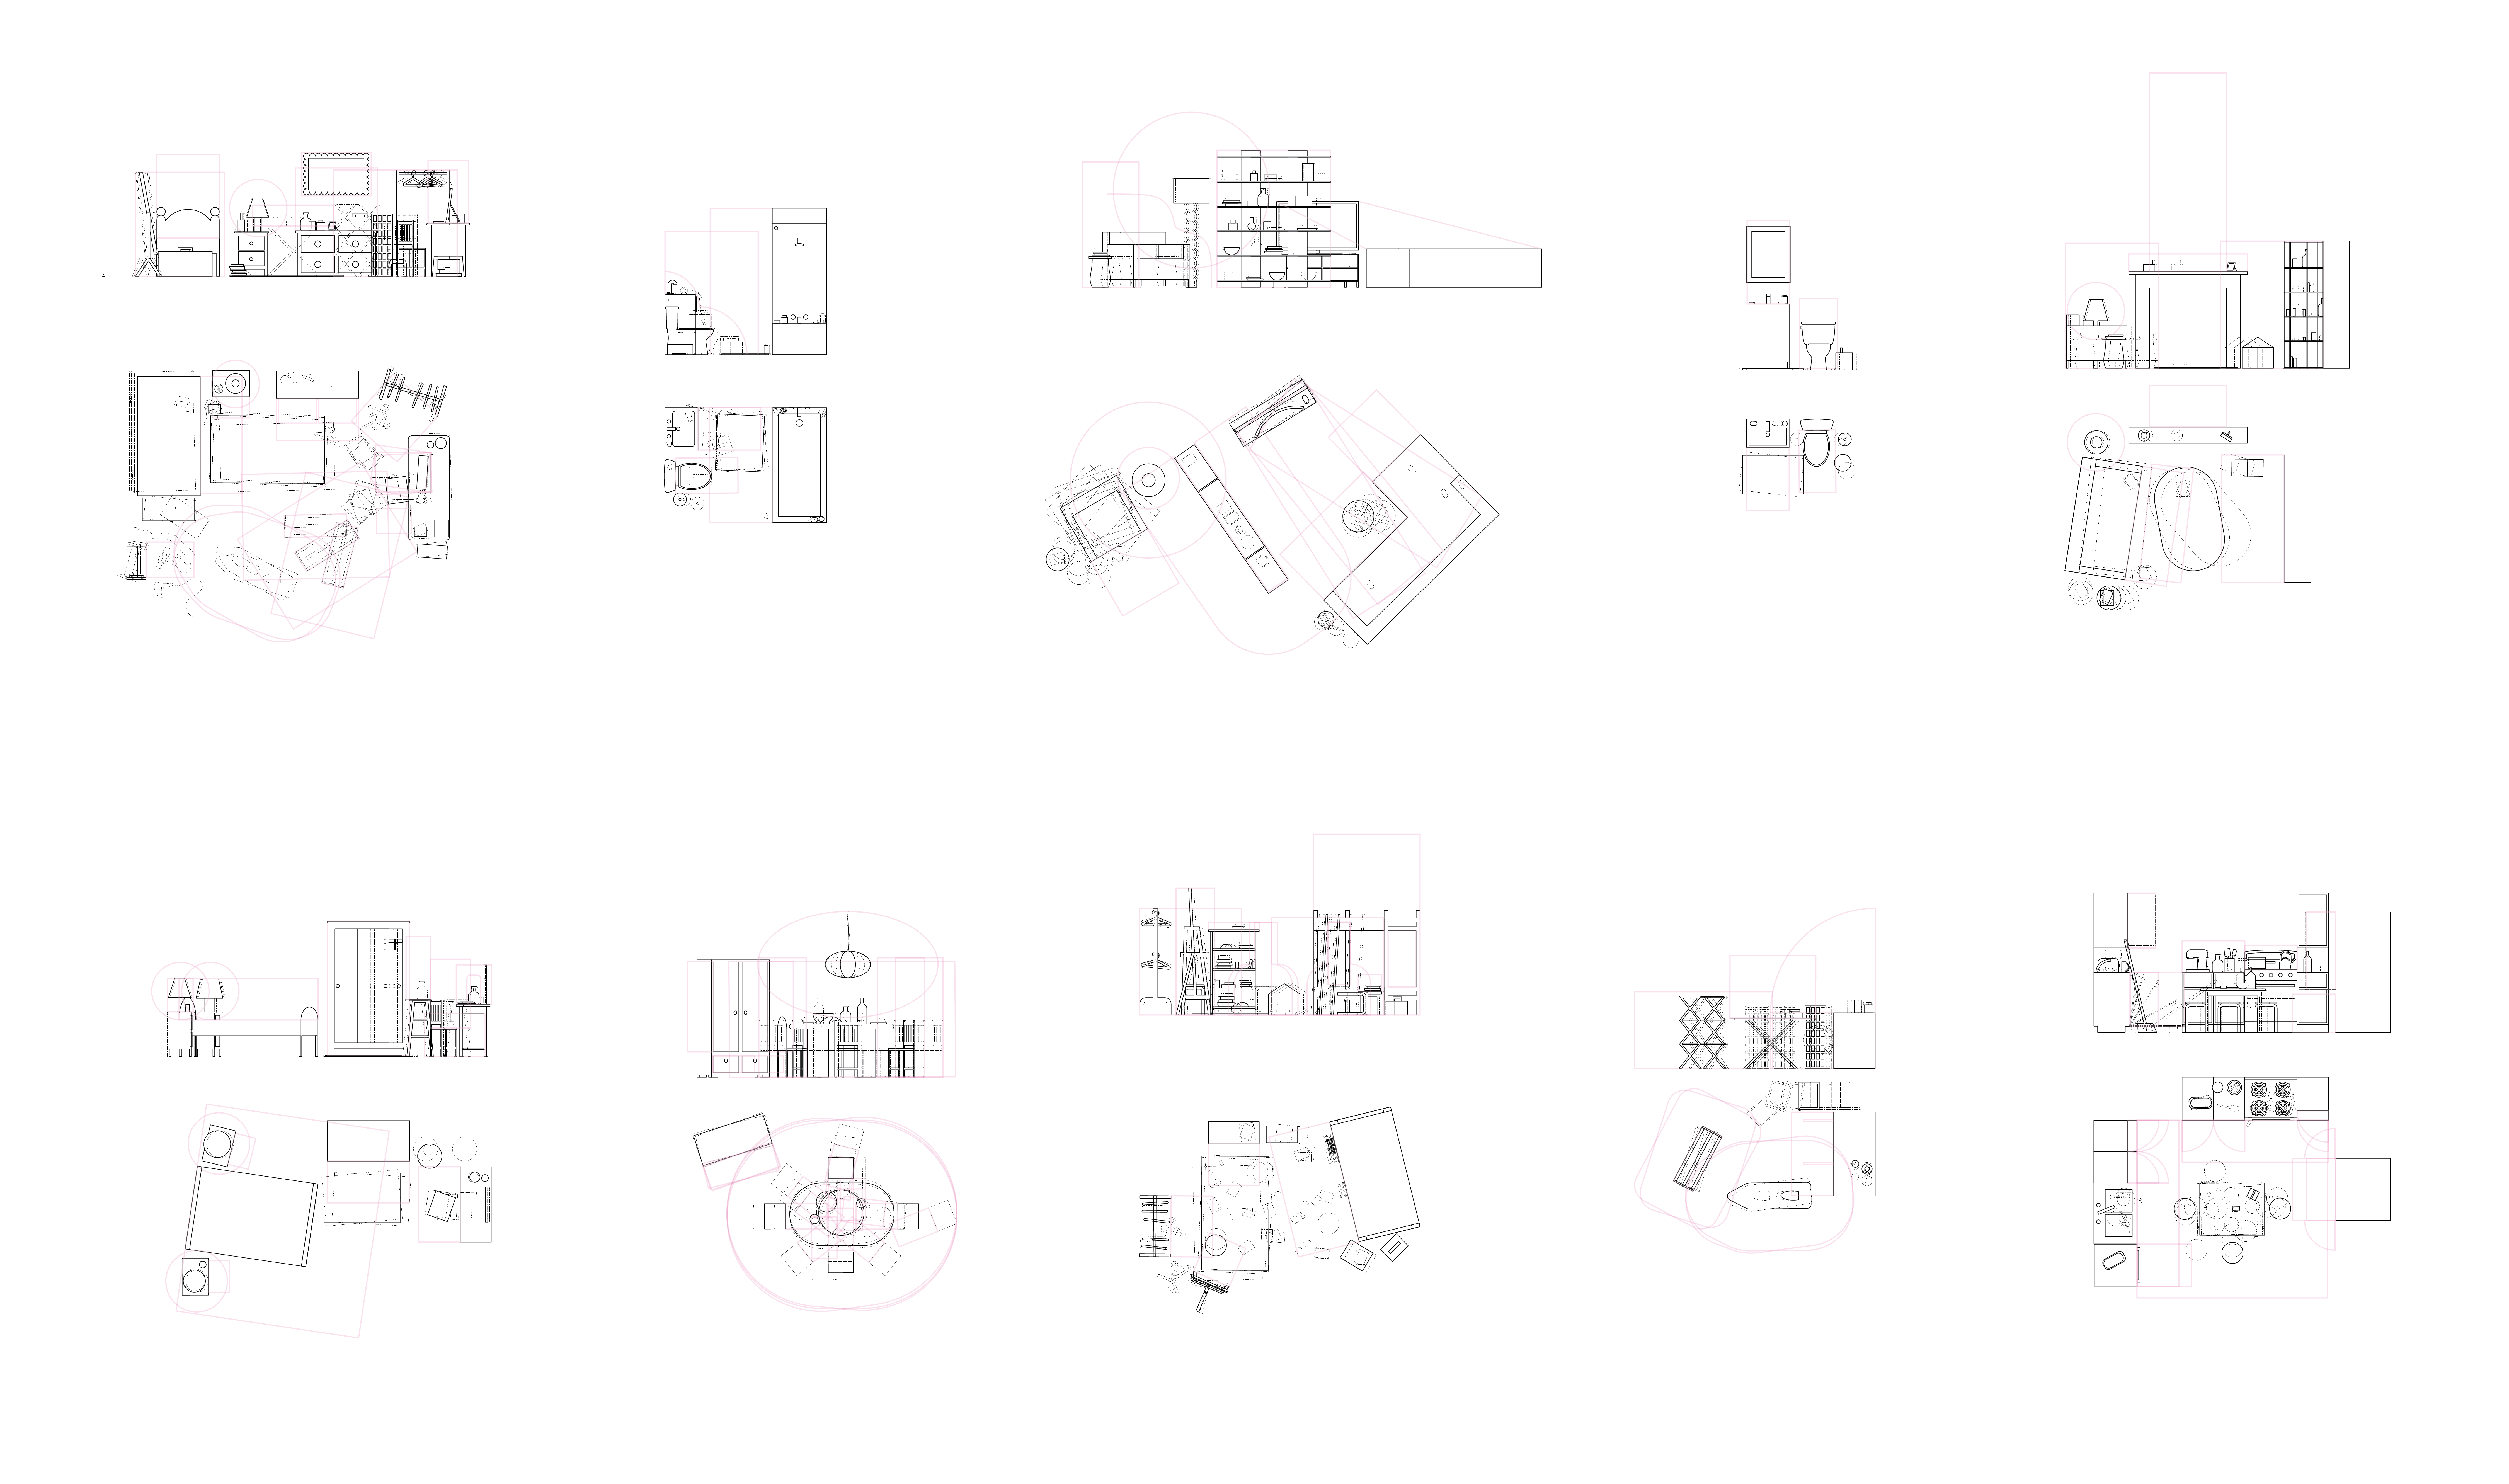 /Plan%20and%20elevation%20drawings%20for%2010%20different%20scenes%20created%20from%20the%20manipulation%20of%20the%201%3A12%20scale%20objects%20made%2C%20documenting%20the%20movement%20and%20aura%20of%20the%20objects.